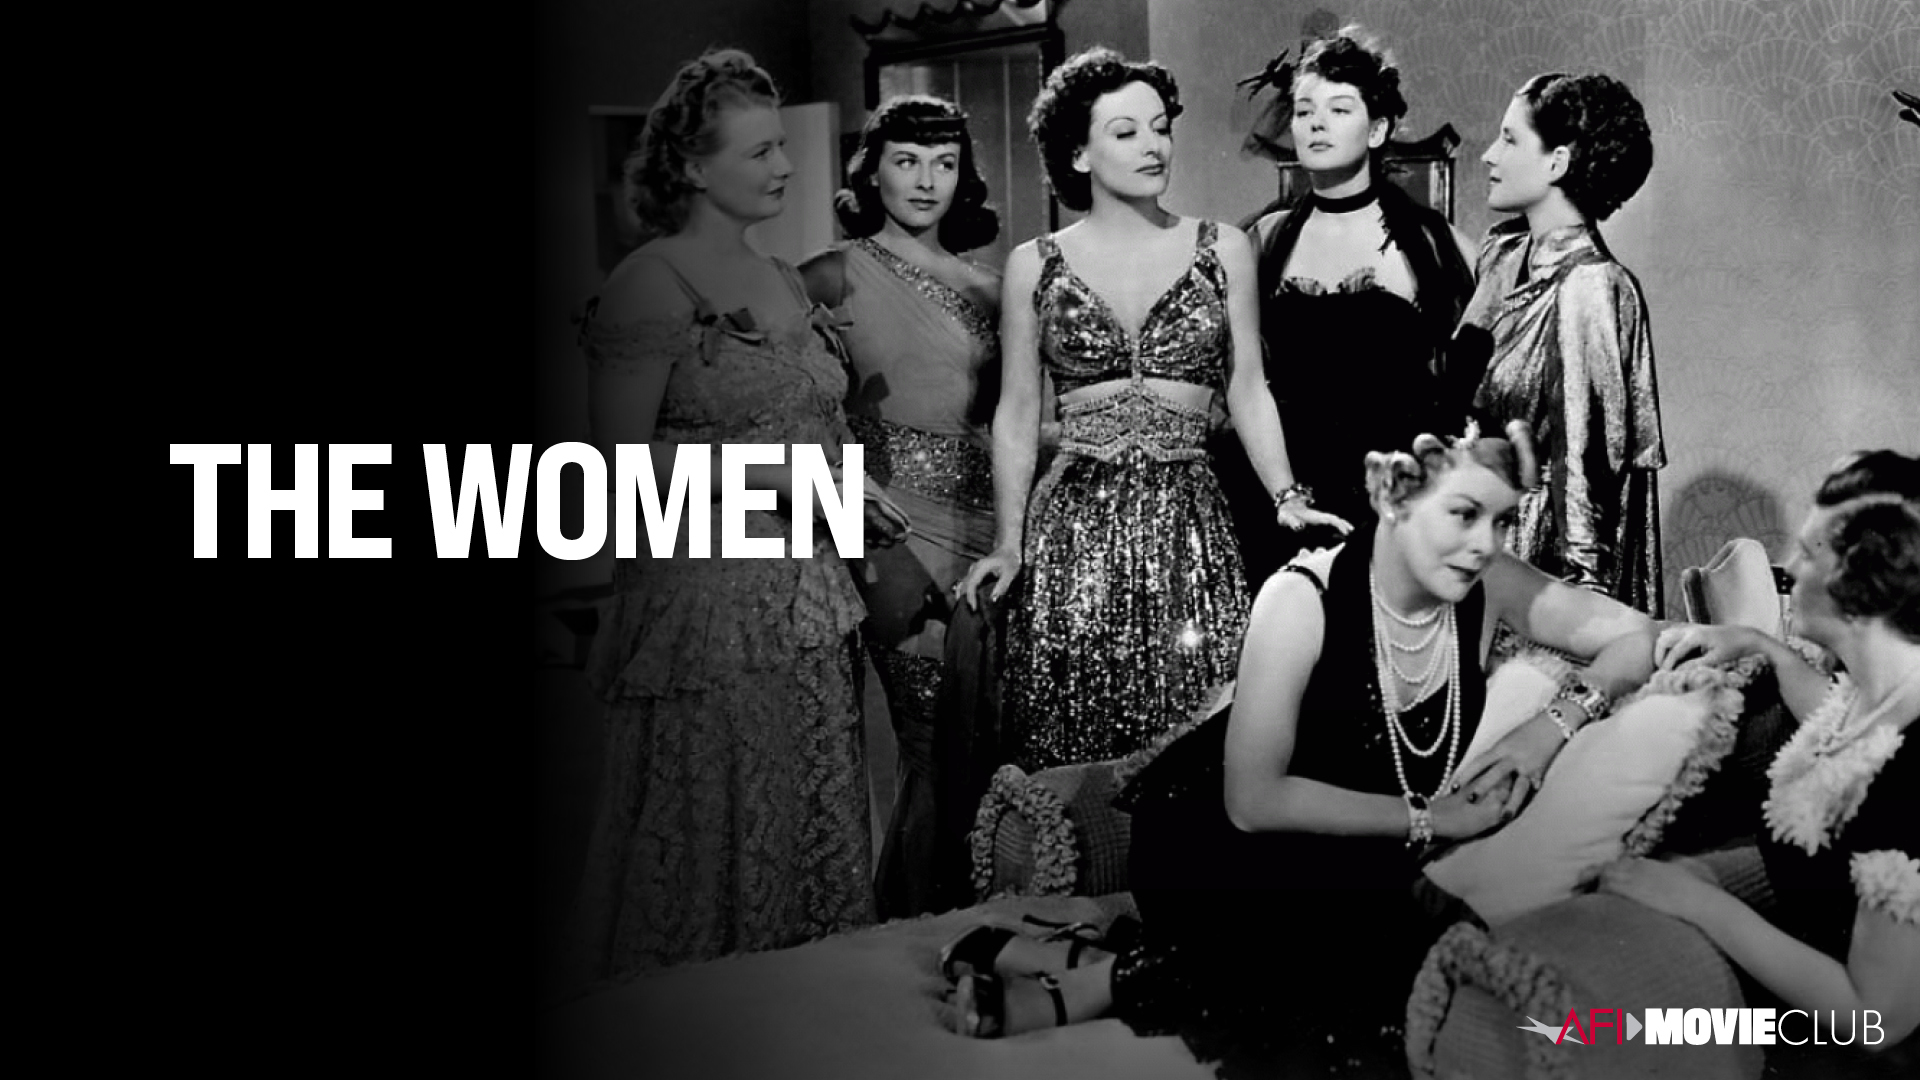 The Women Film Still - Joan Crawford, Paulette Goddard, Mary Boland, Florence Nash, Phyllis Povah, Rosalind Russell, and Norma Shearer